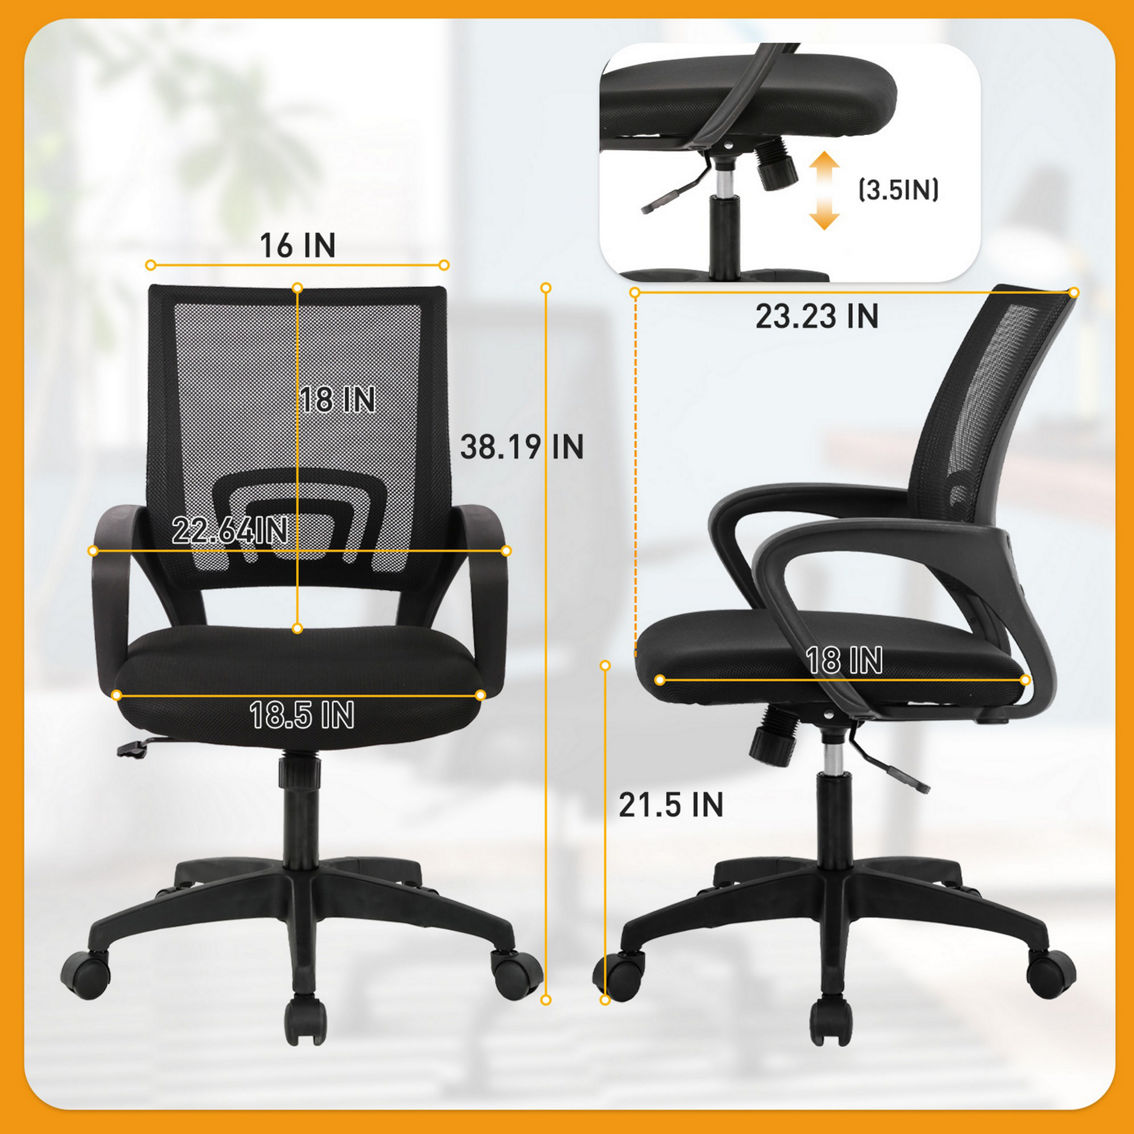 Furniture of America Corel Black Mesh Office Chair - Image 8 of 8